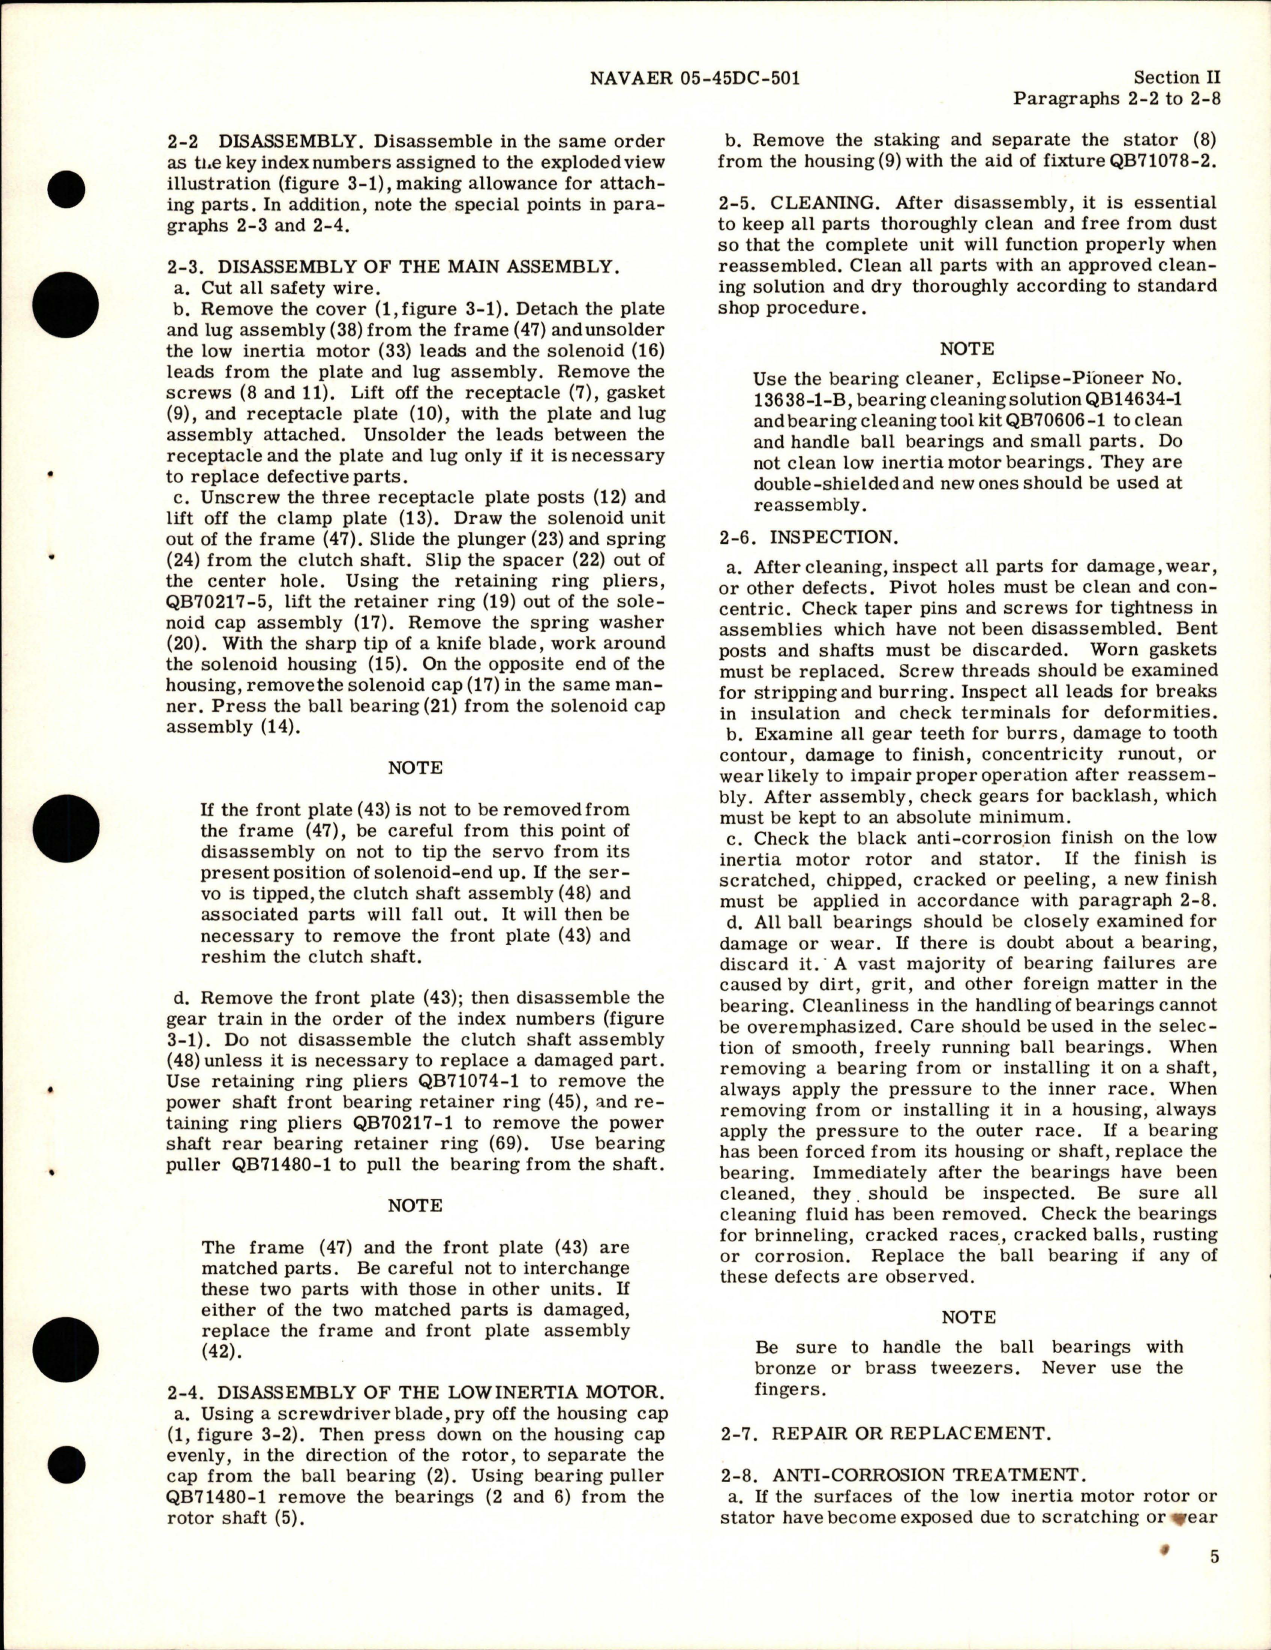 Sample page 5 from AirCorps Library document: Operation, Service and Overhaul Instructions with Parts for Trim Tab Servo - Part 15603-2-B